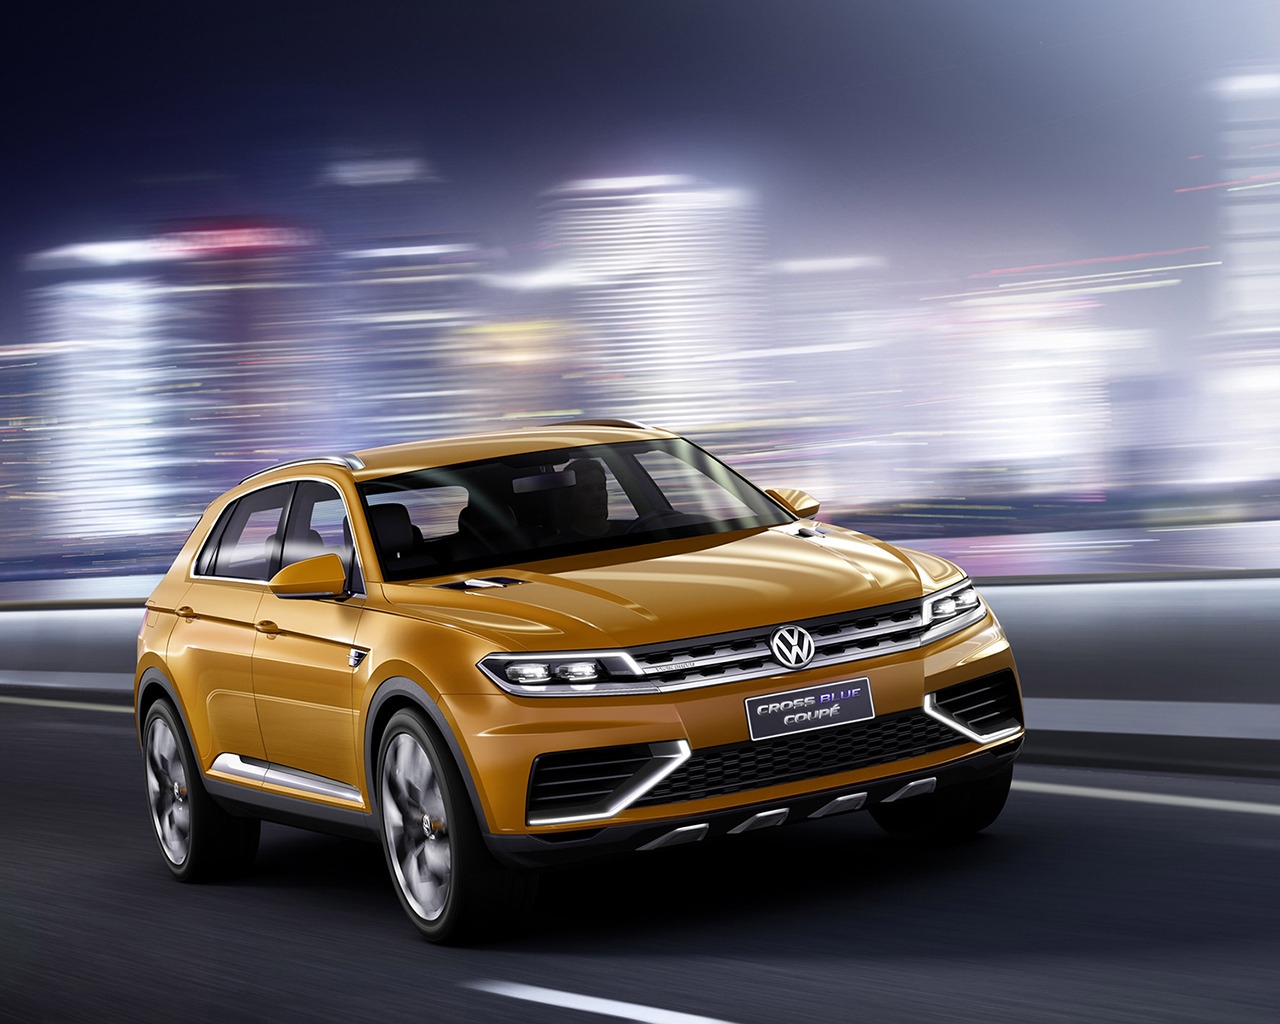 Volkswagen Crossblue Coupe Concept for 1280 x 1024 resolution